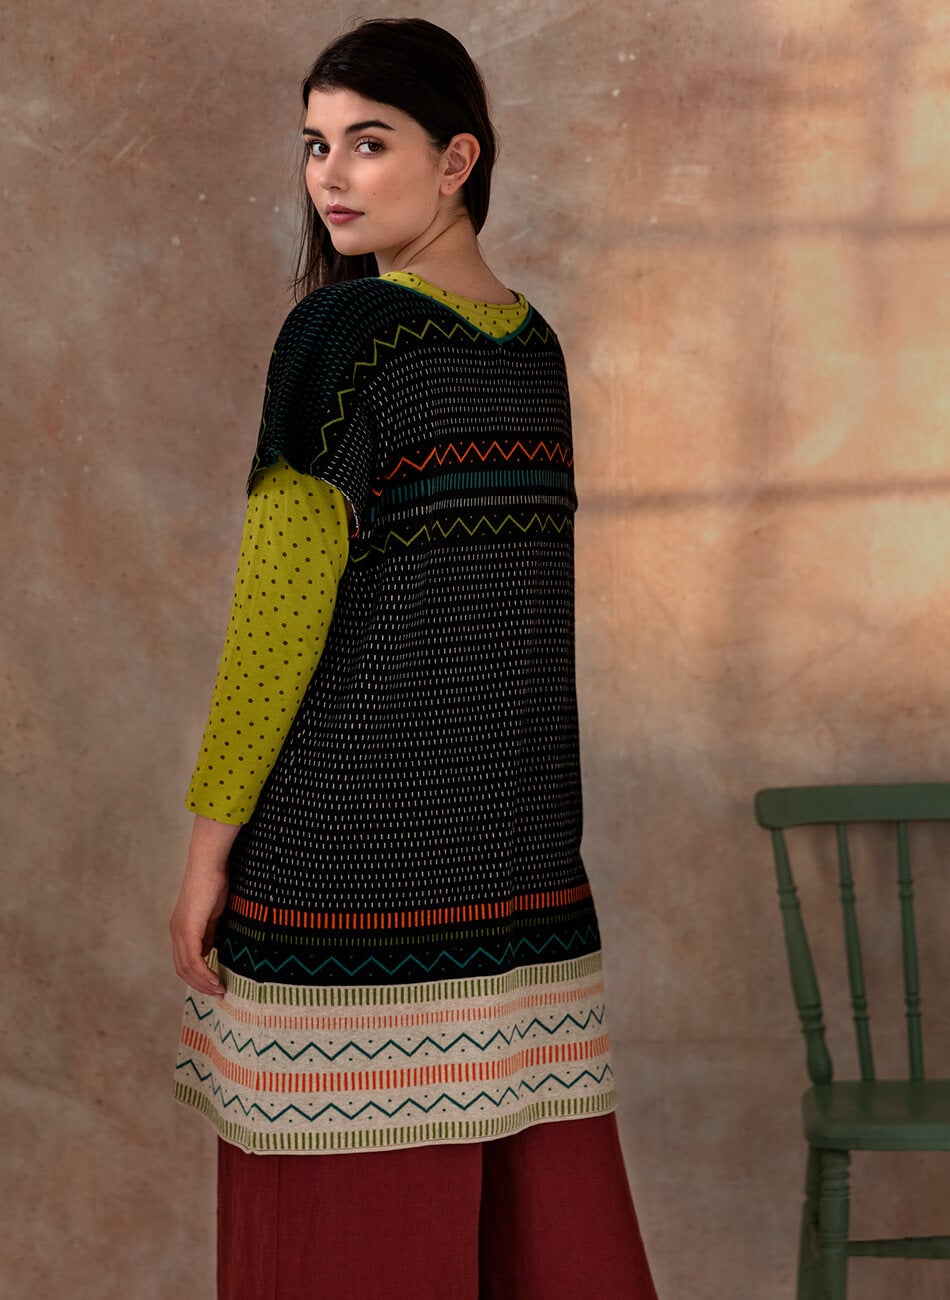 “Strikk” tunic in a recycled cotton knit fabric